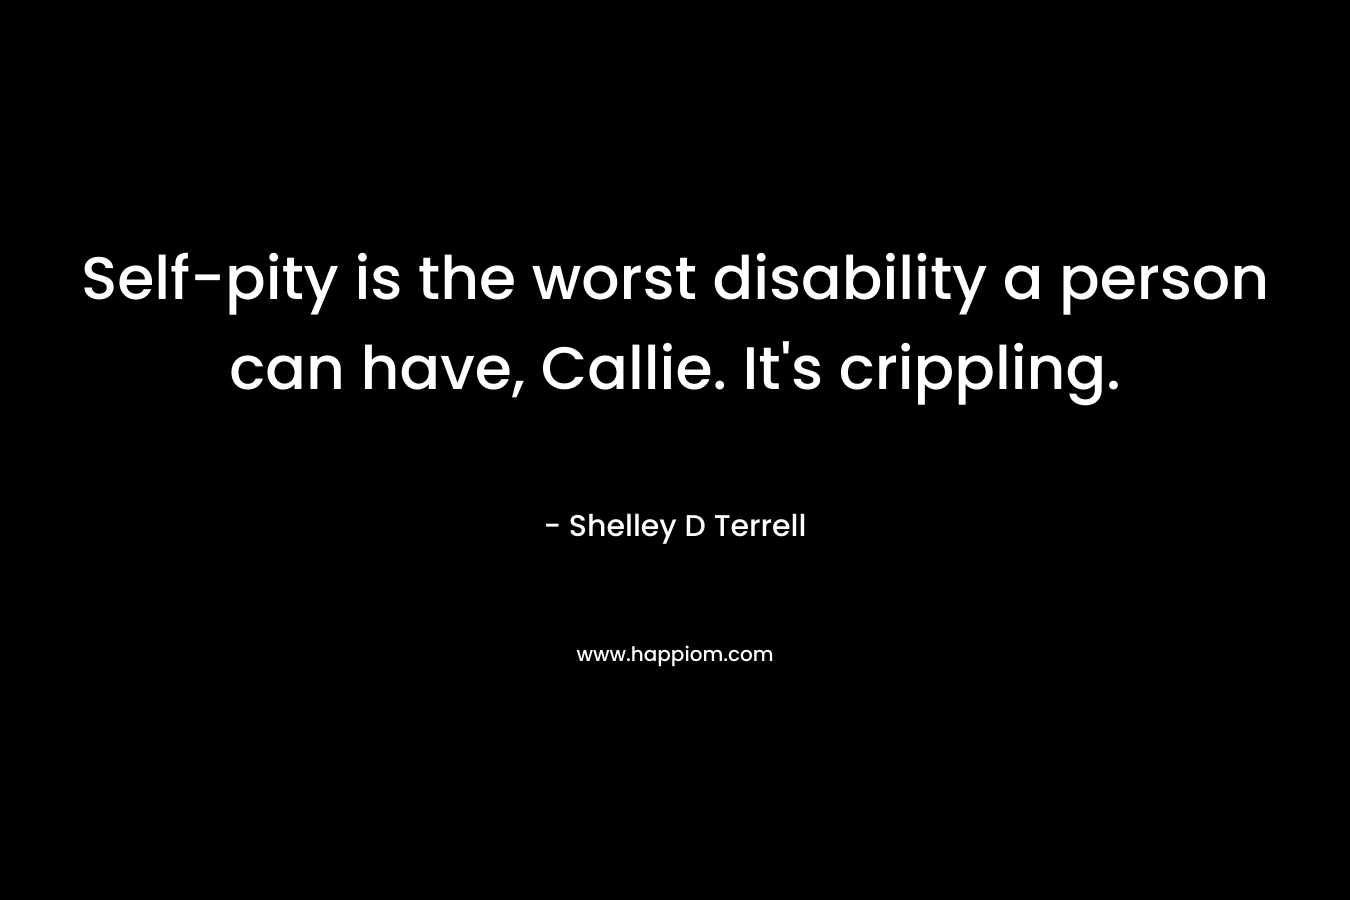 Self-pity is the worst disability a person can have, Callie. It’s crippling. – Shelley D Terrell